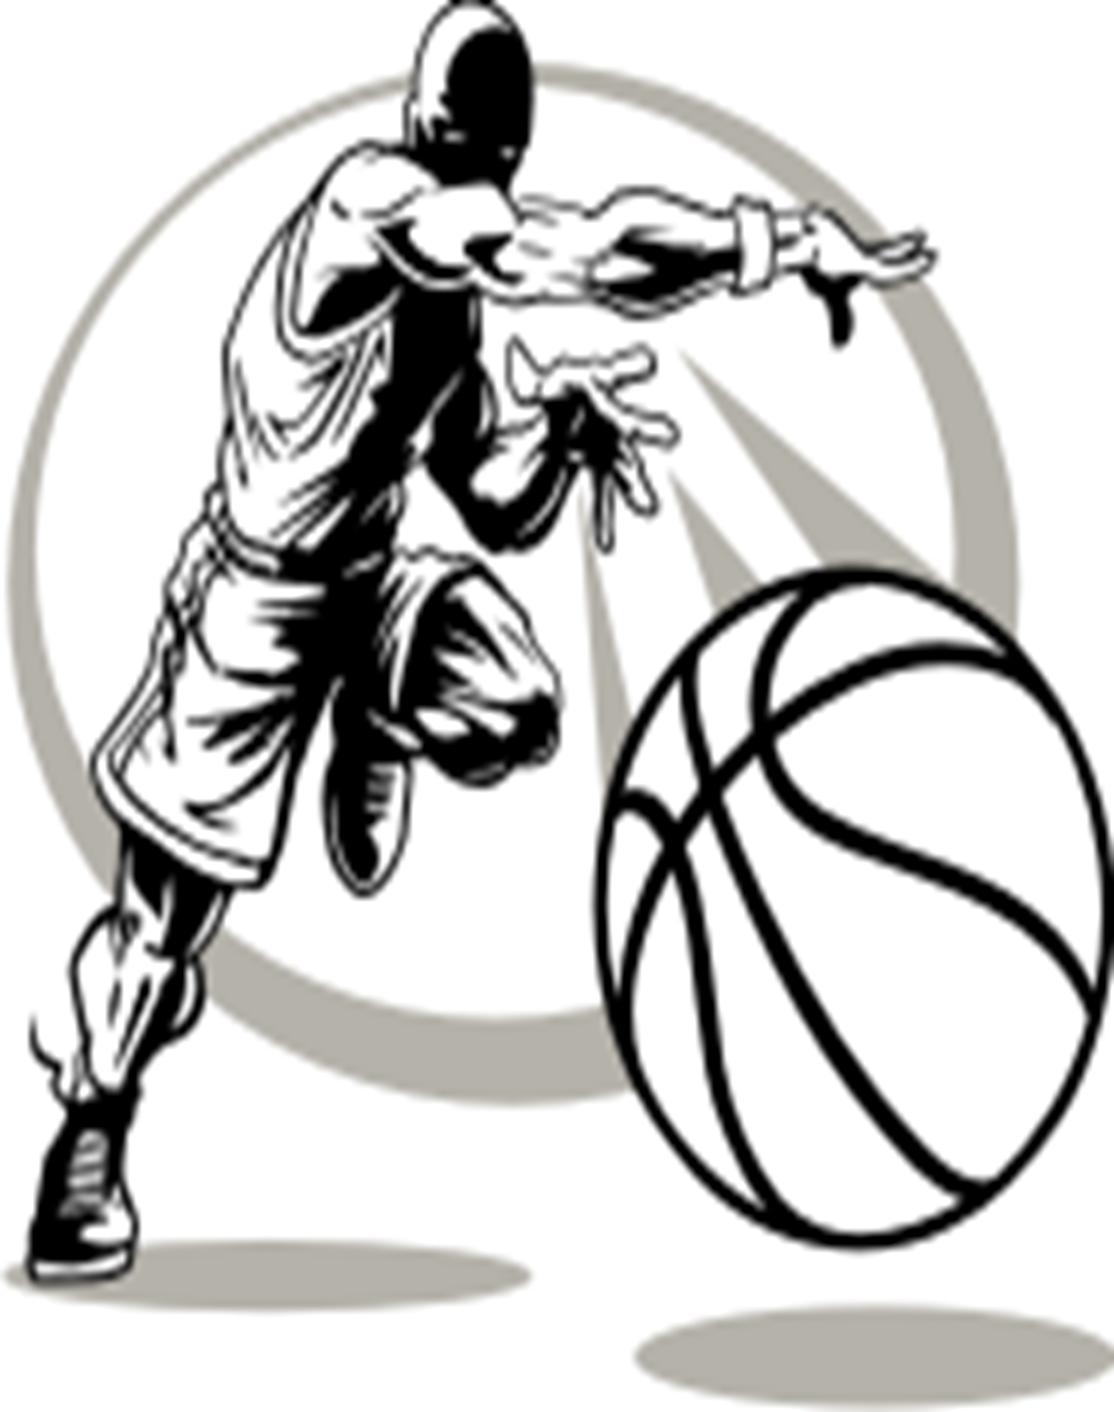 Kid Basketball Player Images Download Png Clipart